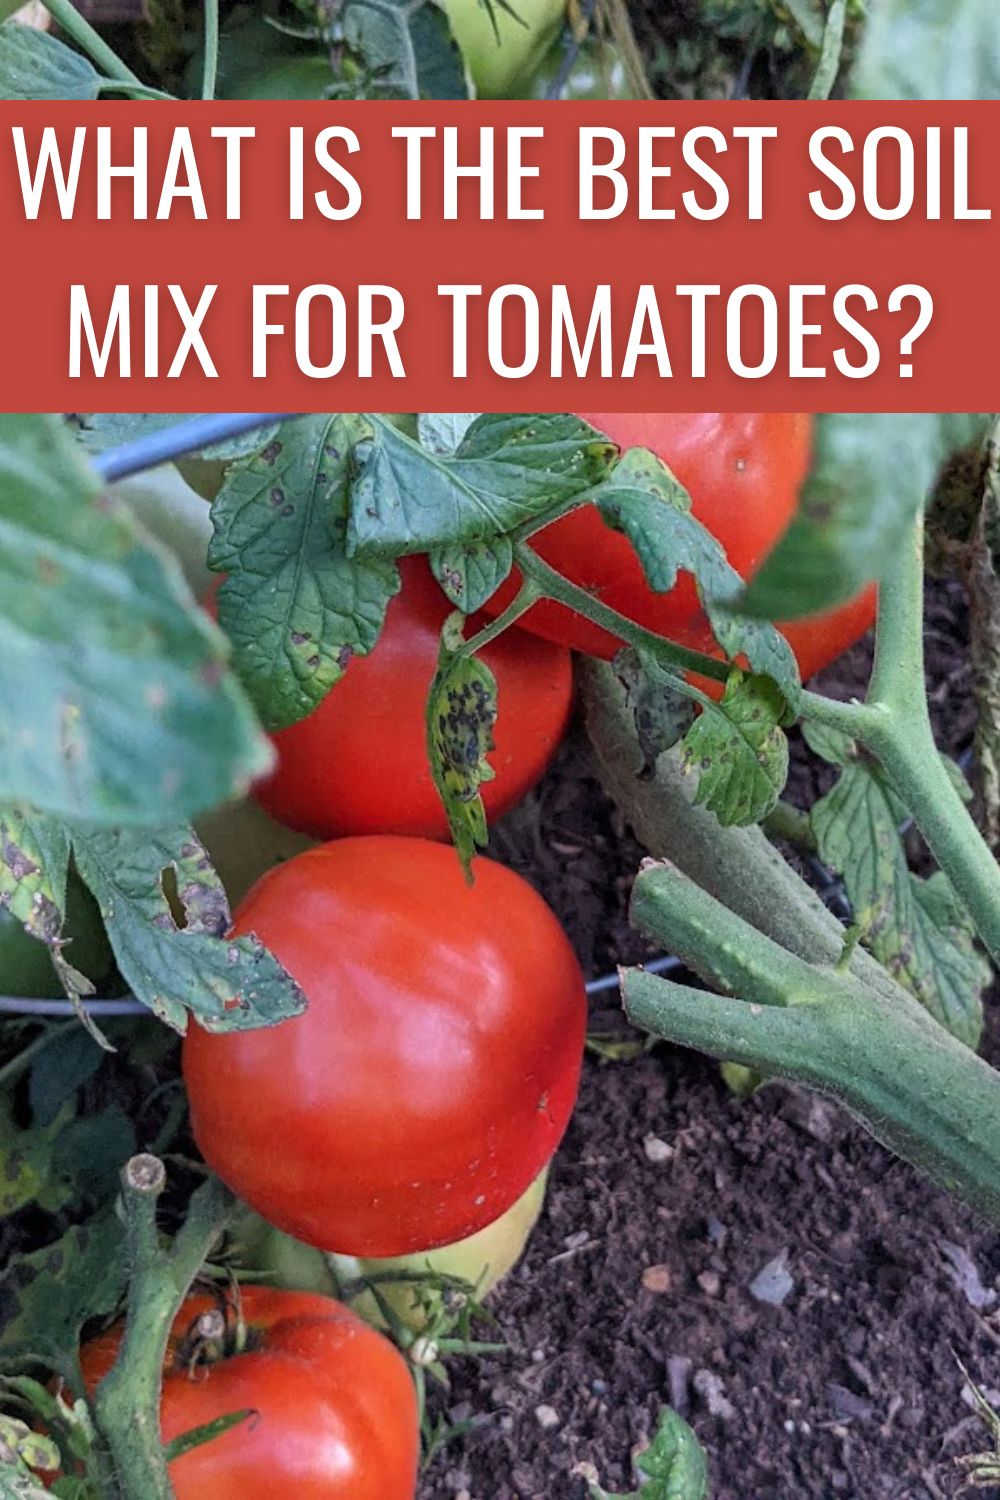 what is the best soil mix for tomatoes?